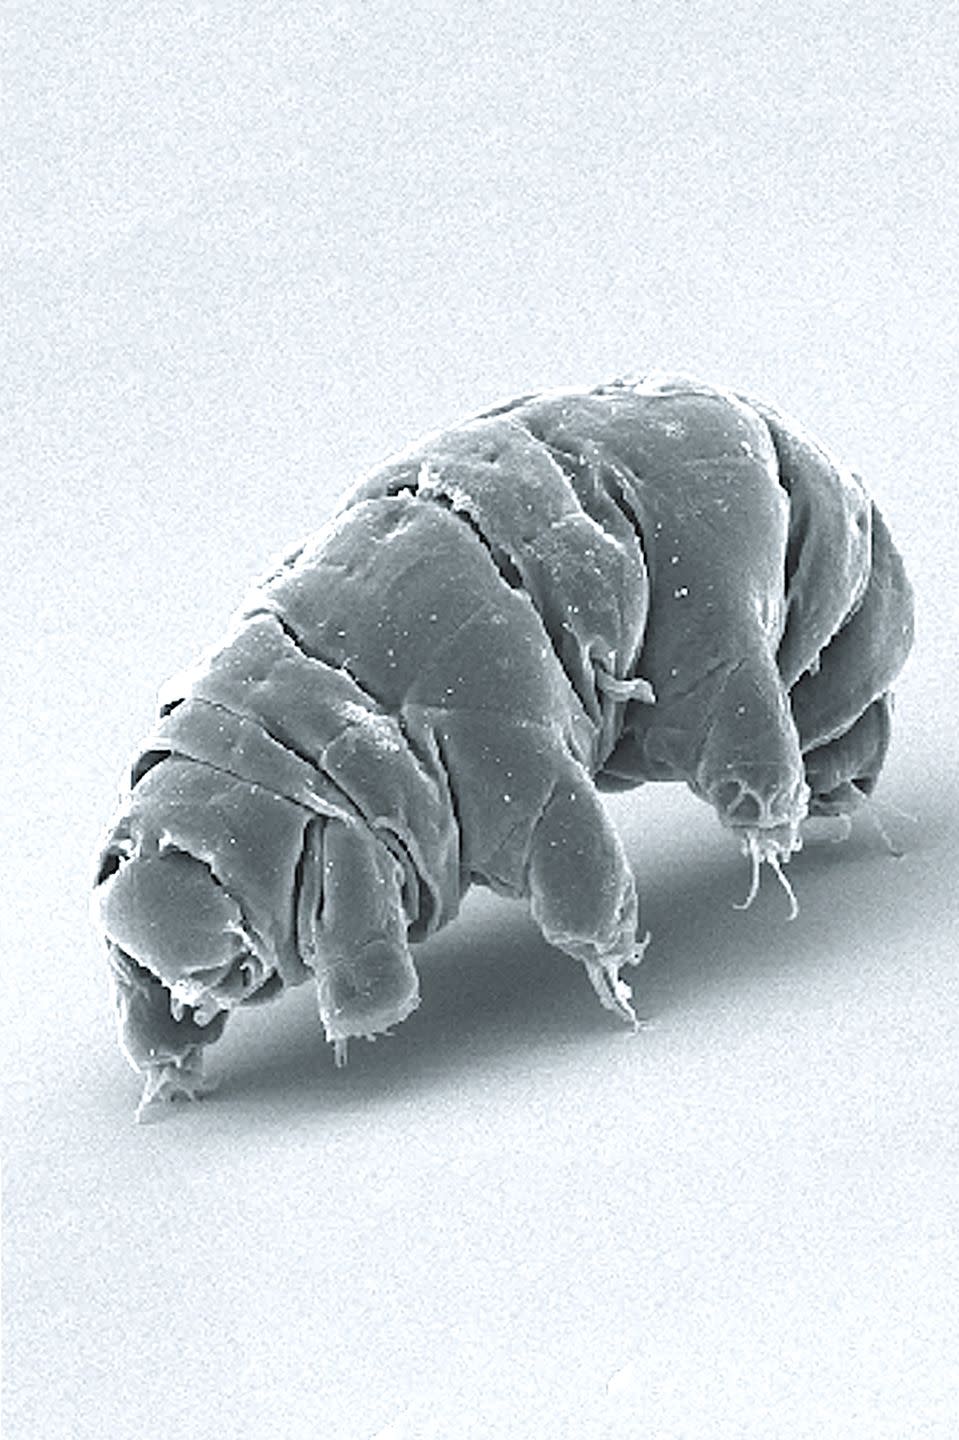 <p>This microscopic animal is one the world's smallest animals, measuring in at 1.5mm. But it's been found to survive in the most extreme conditions, including the bottom of the ocean and Mount Everest. Tardigrades are also the first animal to survive in space. Scientists believe it’s due to the fact they can survive extreme drying, going into a type of hibernation state before being rehydrated.</p>